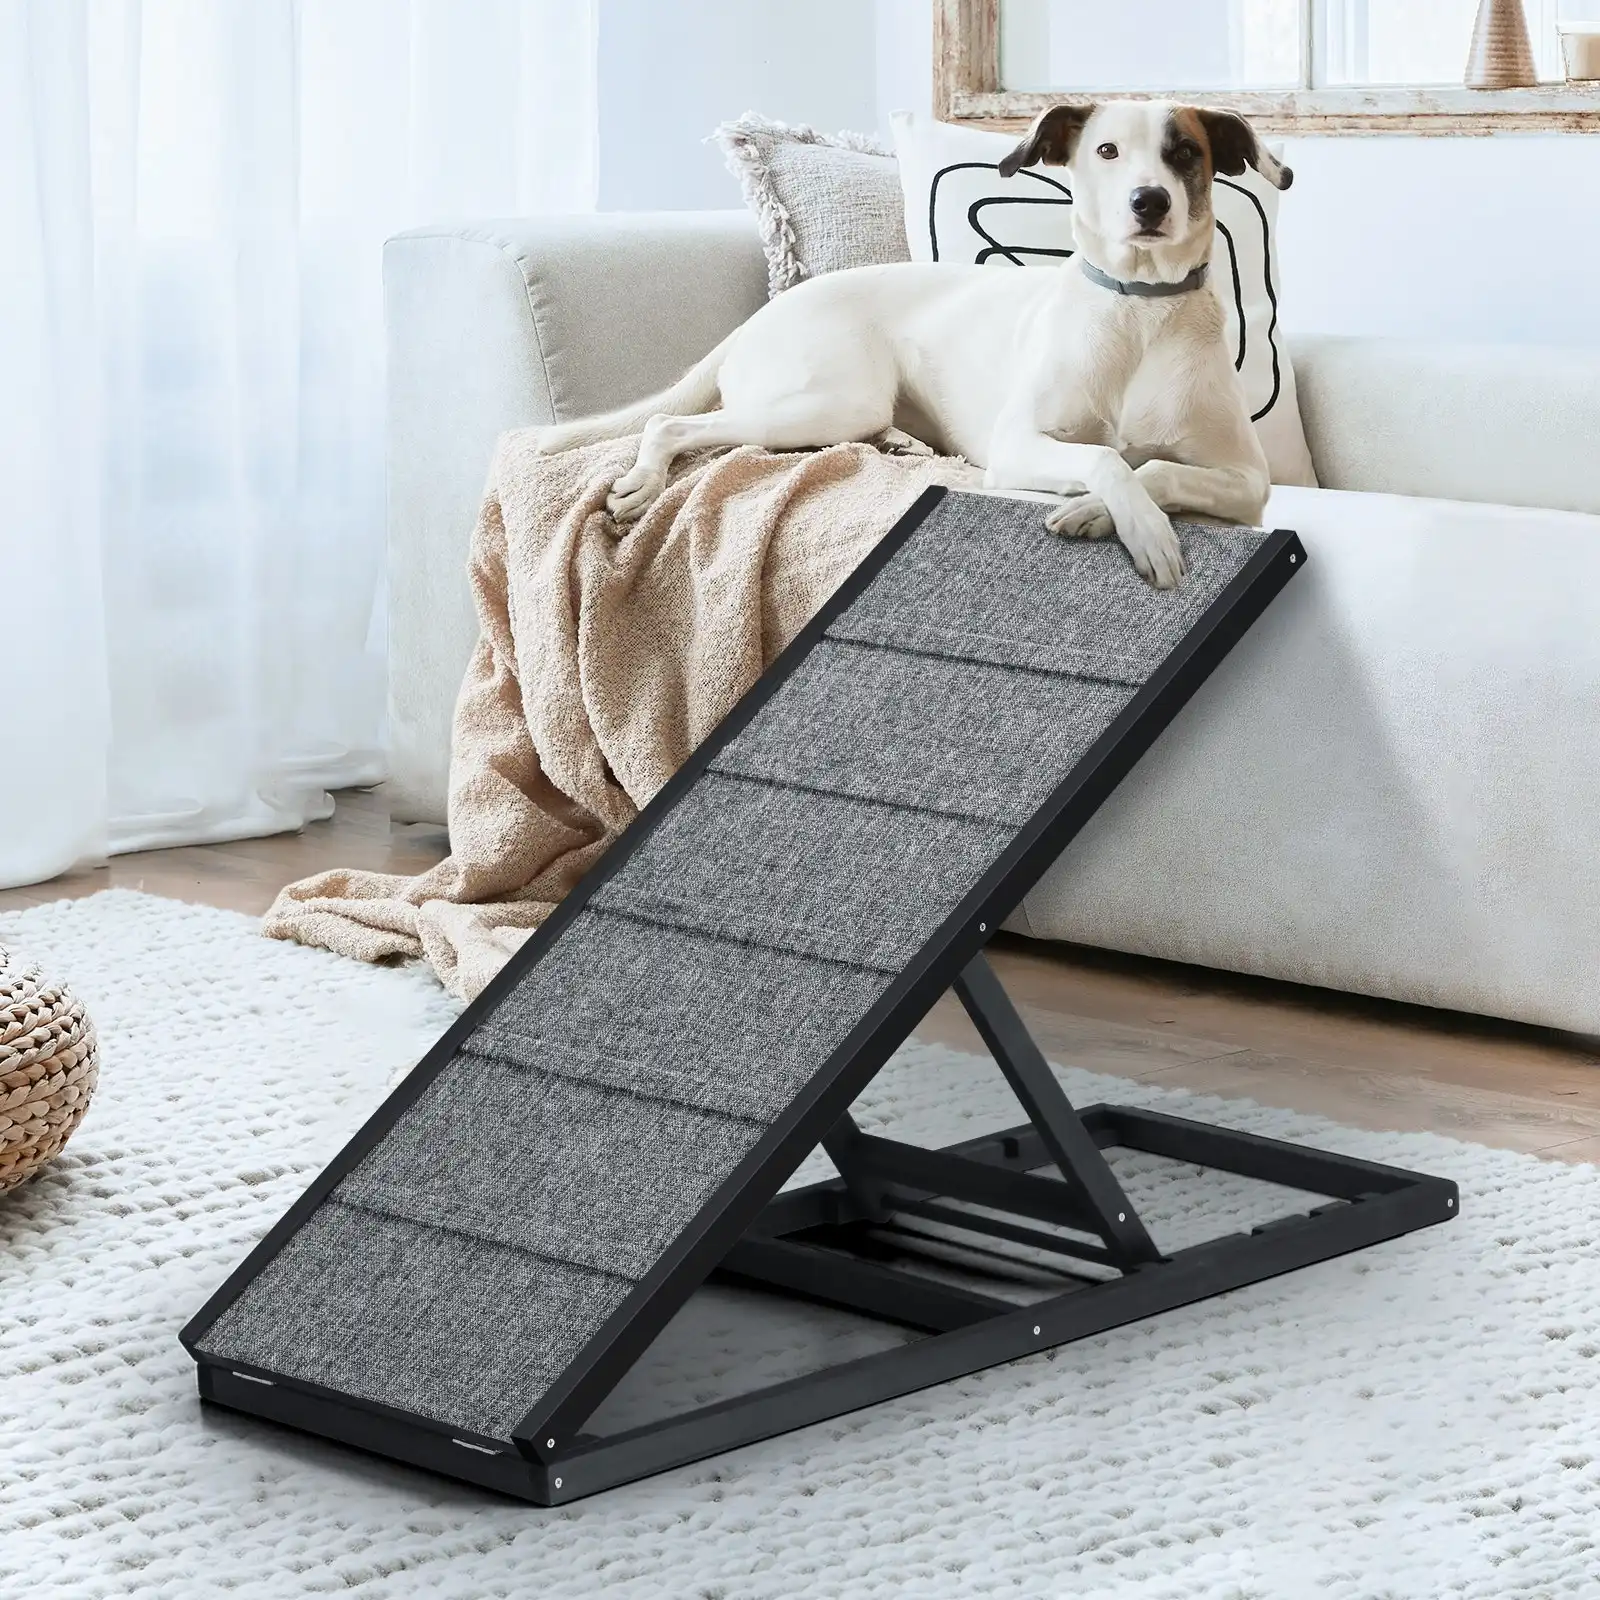 Alopet Dog Pet Ramp Adjustable Height Dogs Stairs Bed Sofa Car Foldable 100cm